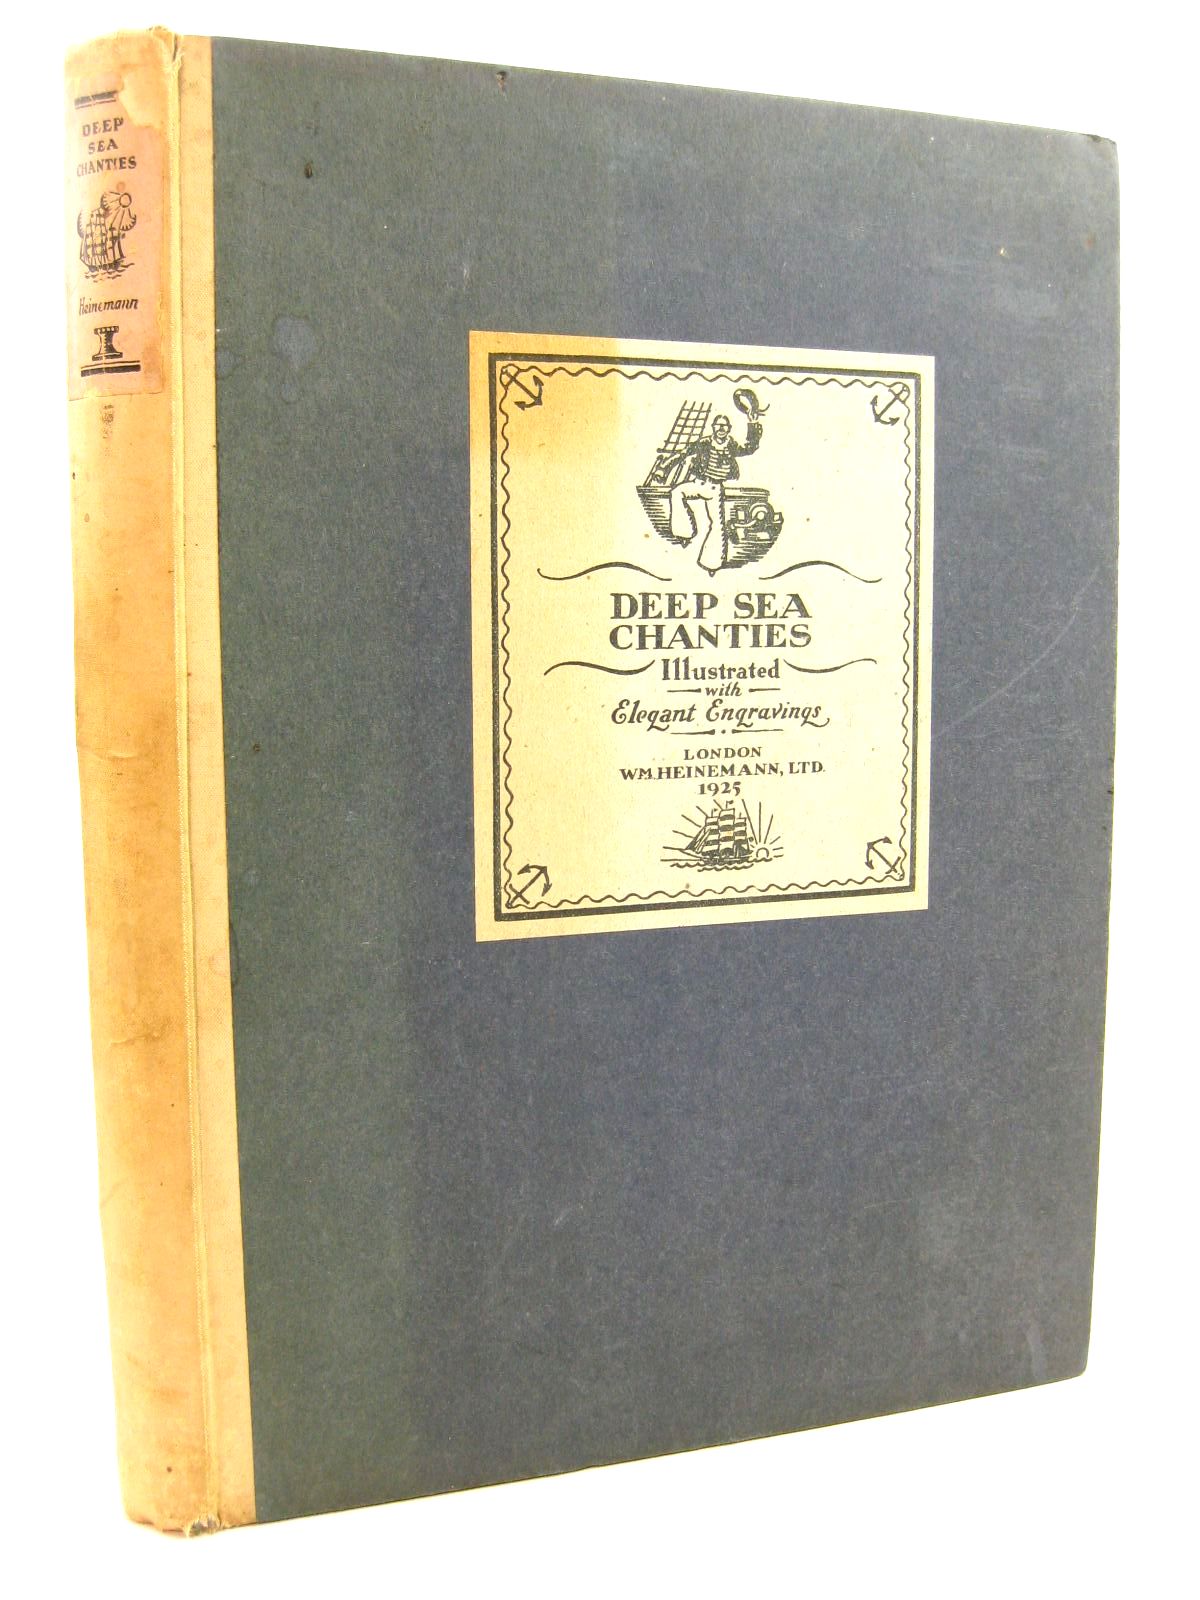 Photo of DEEP SEA CHANTIES written by Shay, Frank McFee, William illustrated by Wilson, Edward A. published by William Heinemann Ltd. (STOCK CODE: 1316787)  for sale by Stella & Rose's Books